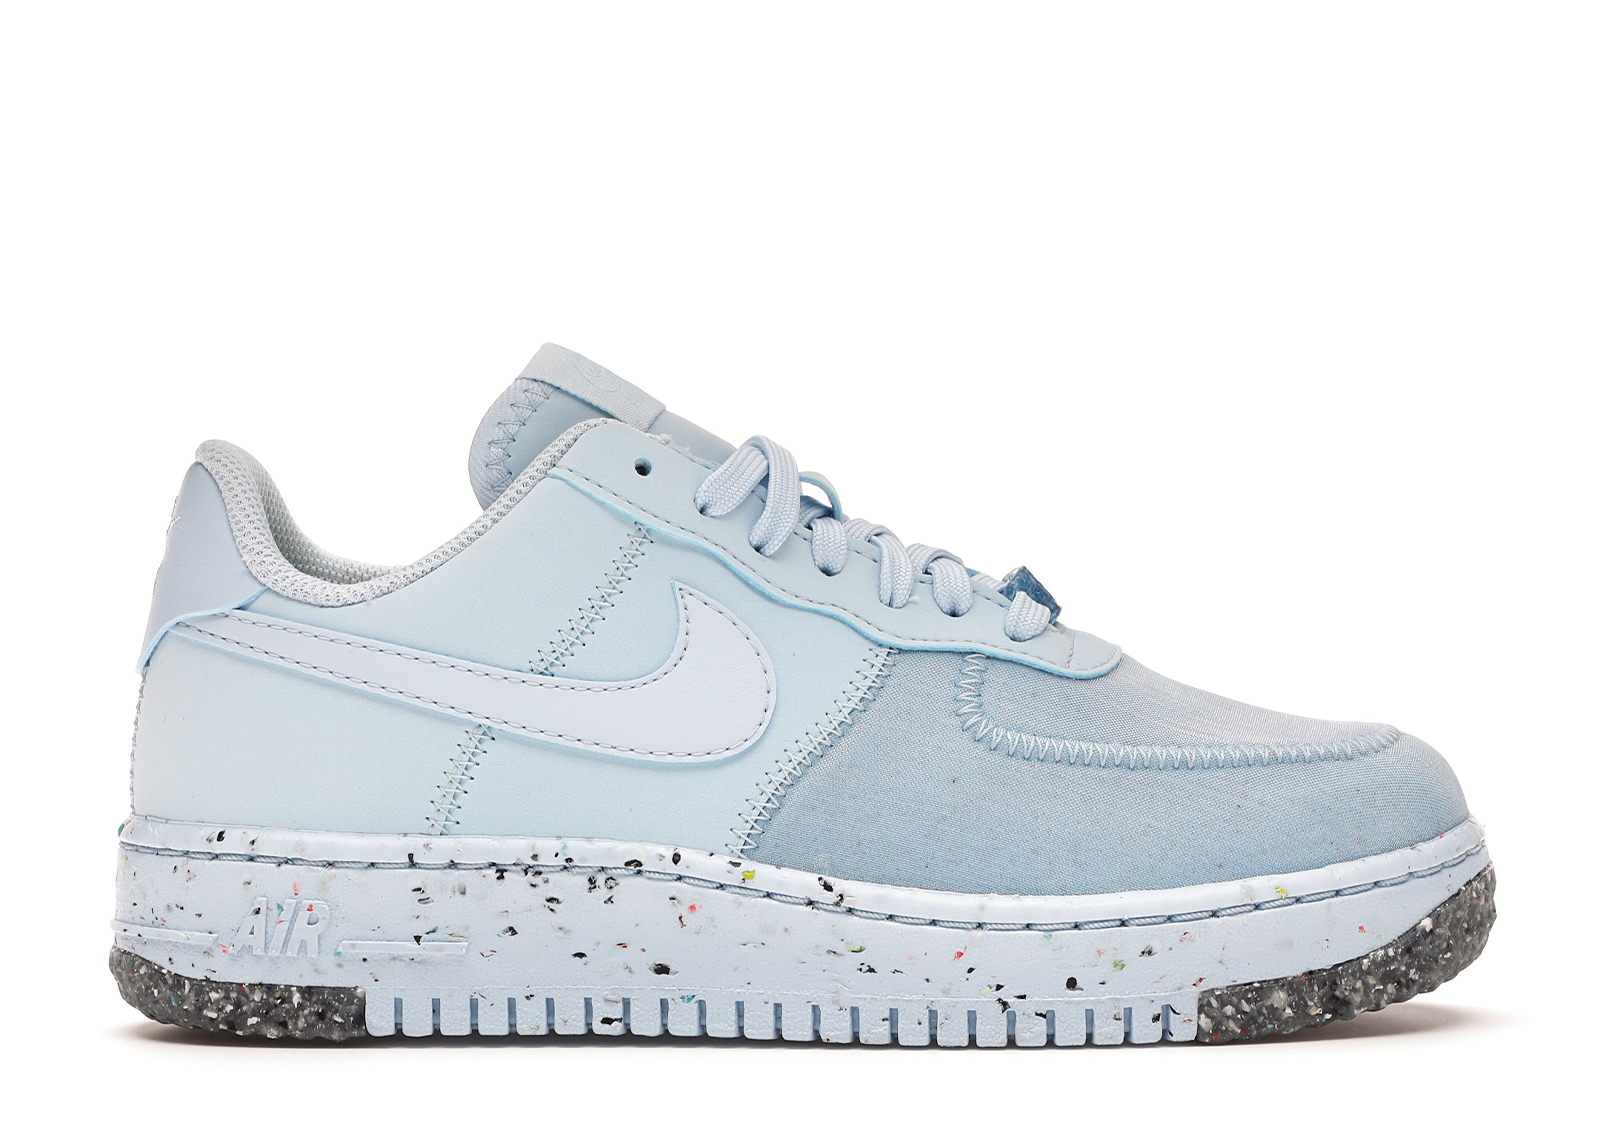 Nike Air Force 1 Crater Summit White (Women's) - CT1986-100 - US